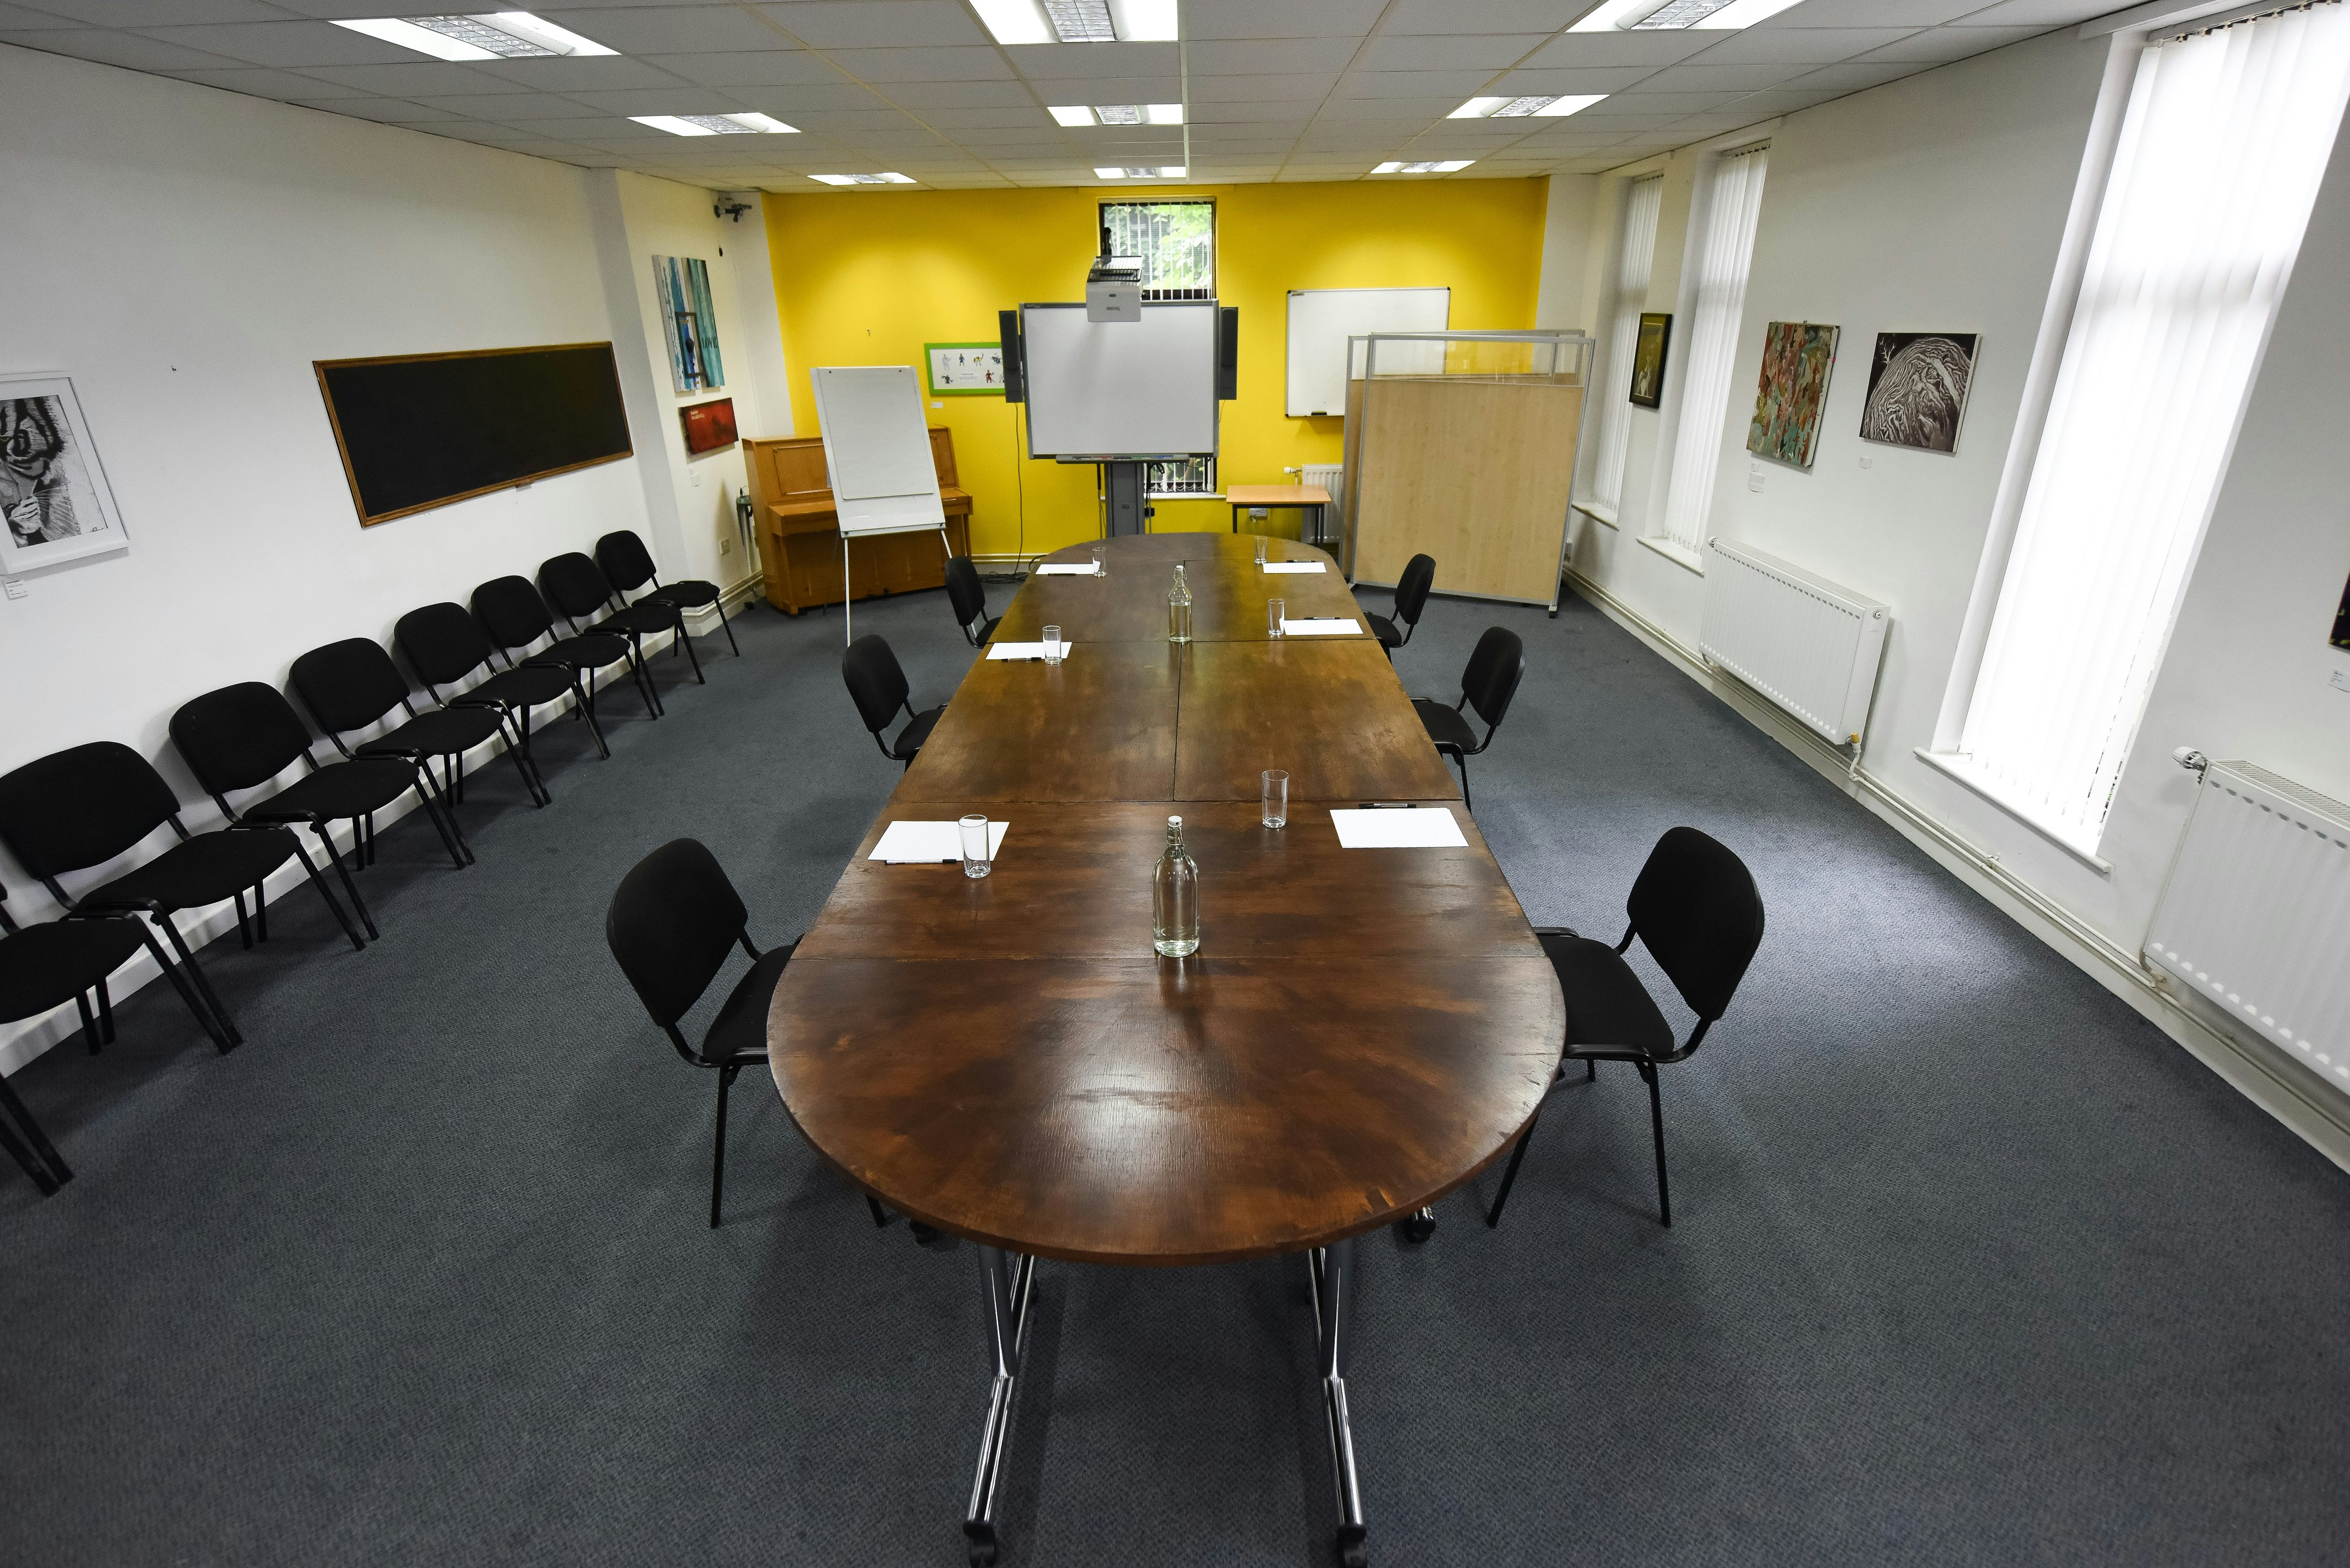 Business | The Meeting Room